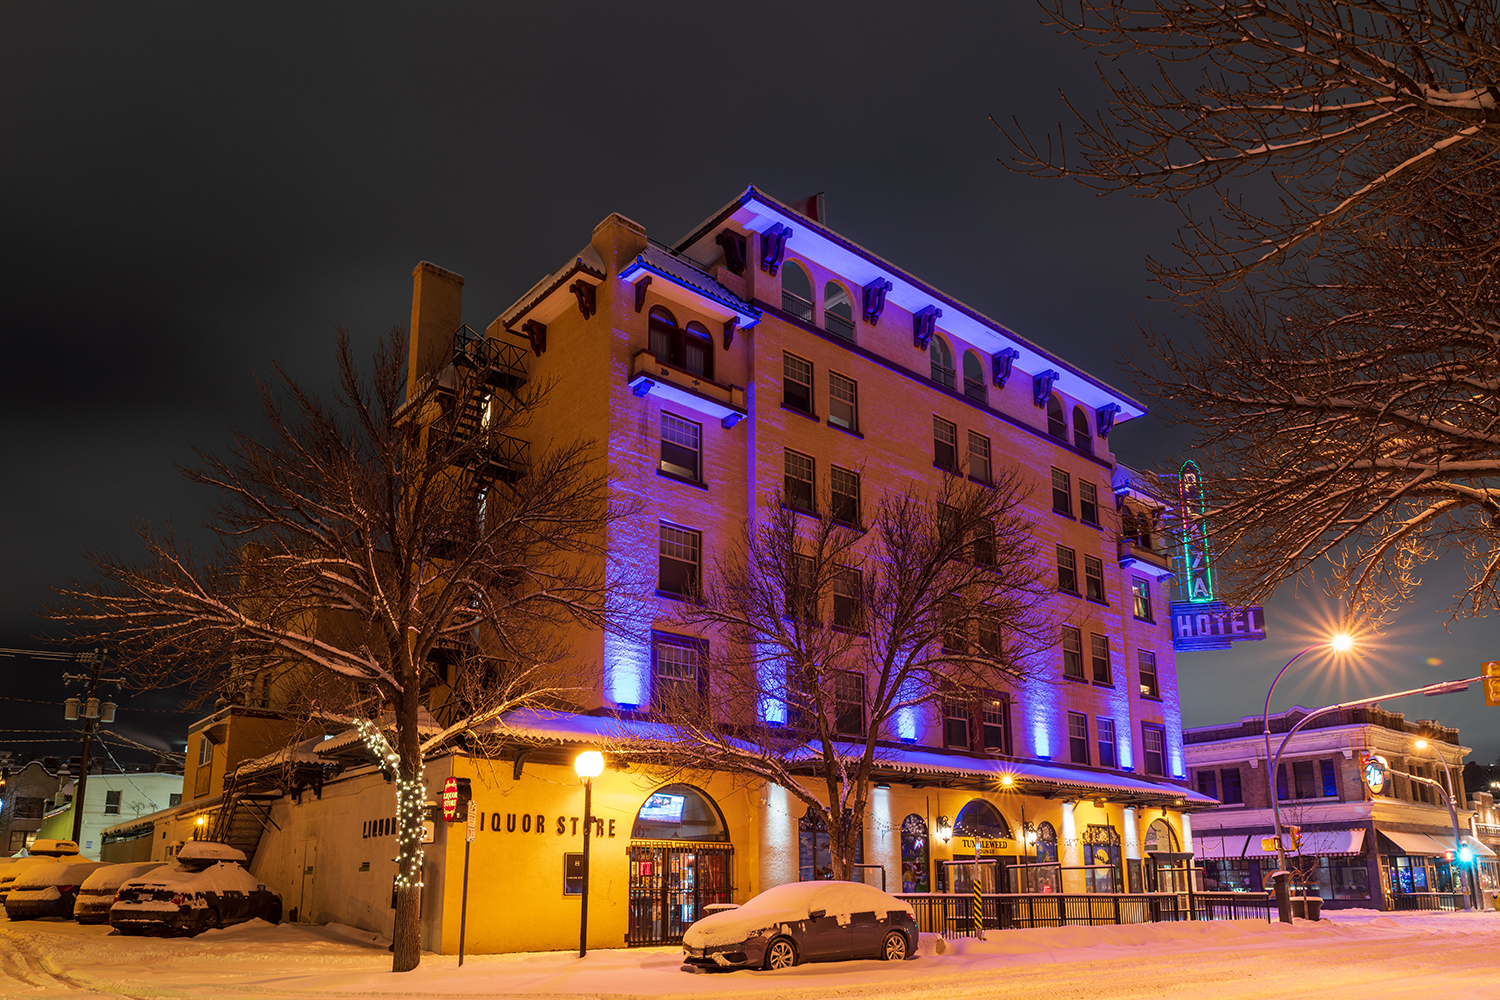 Kamloops Other hotel building with colored lights and dark sky